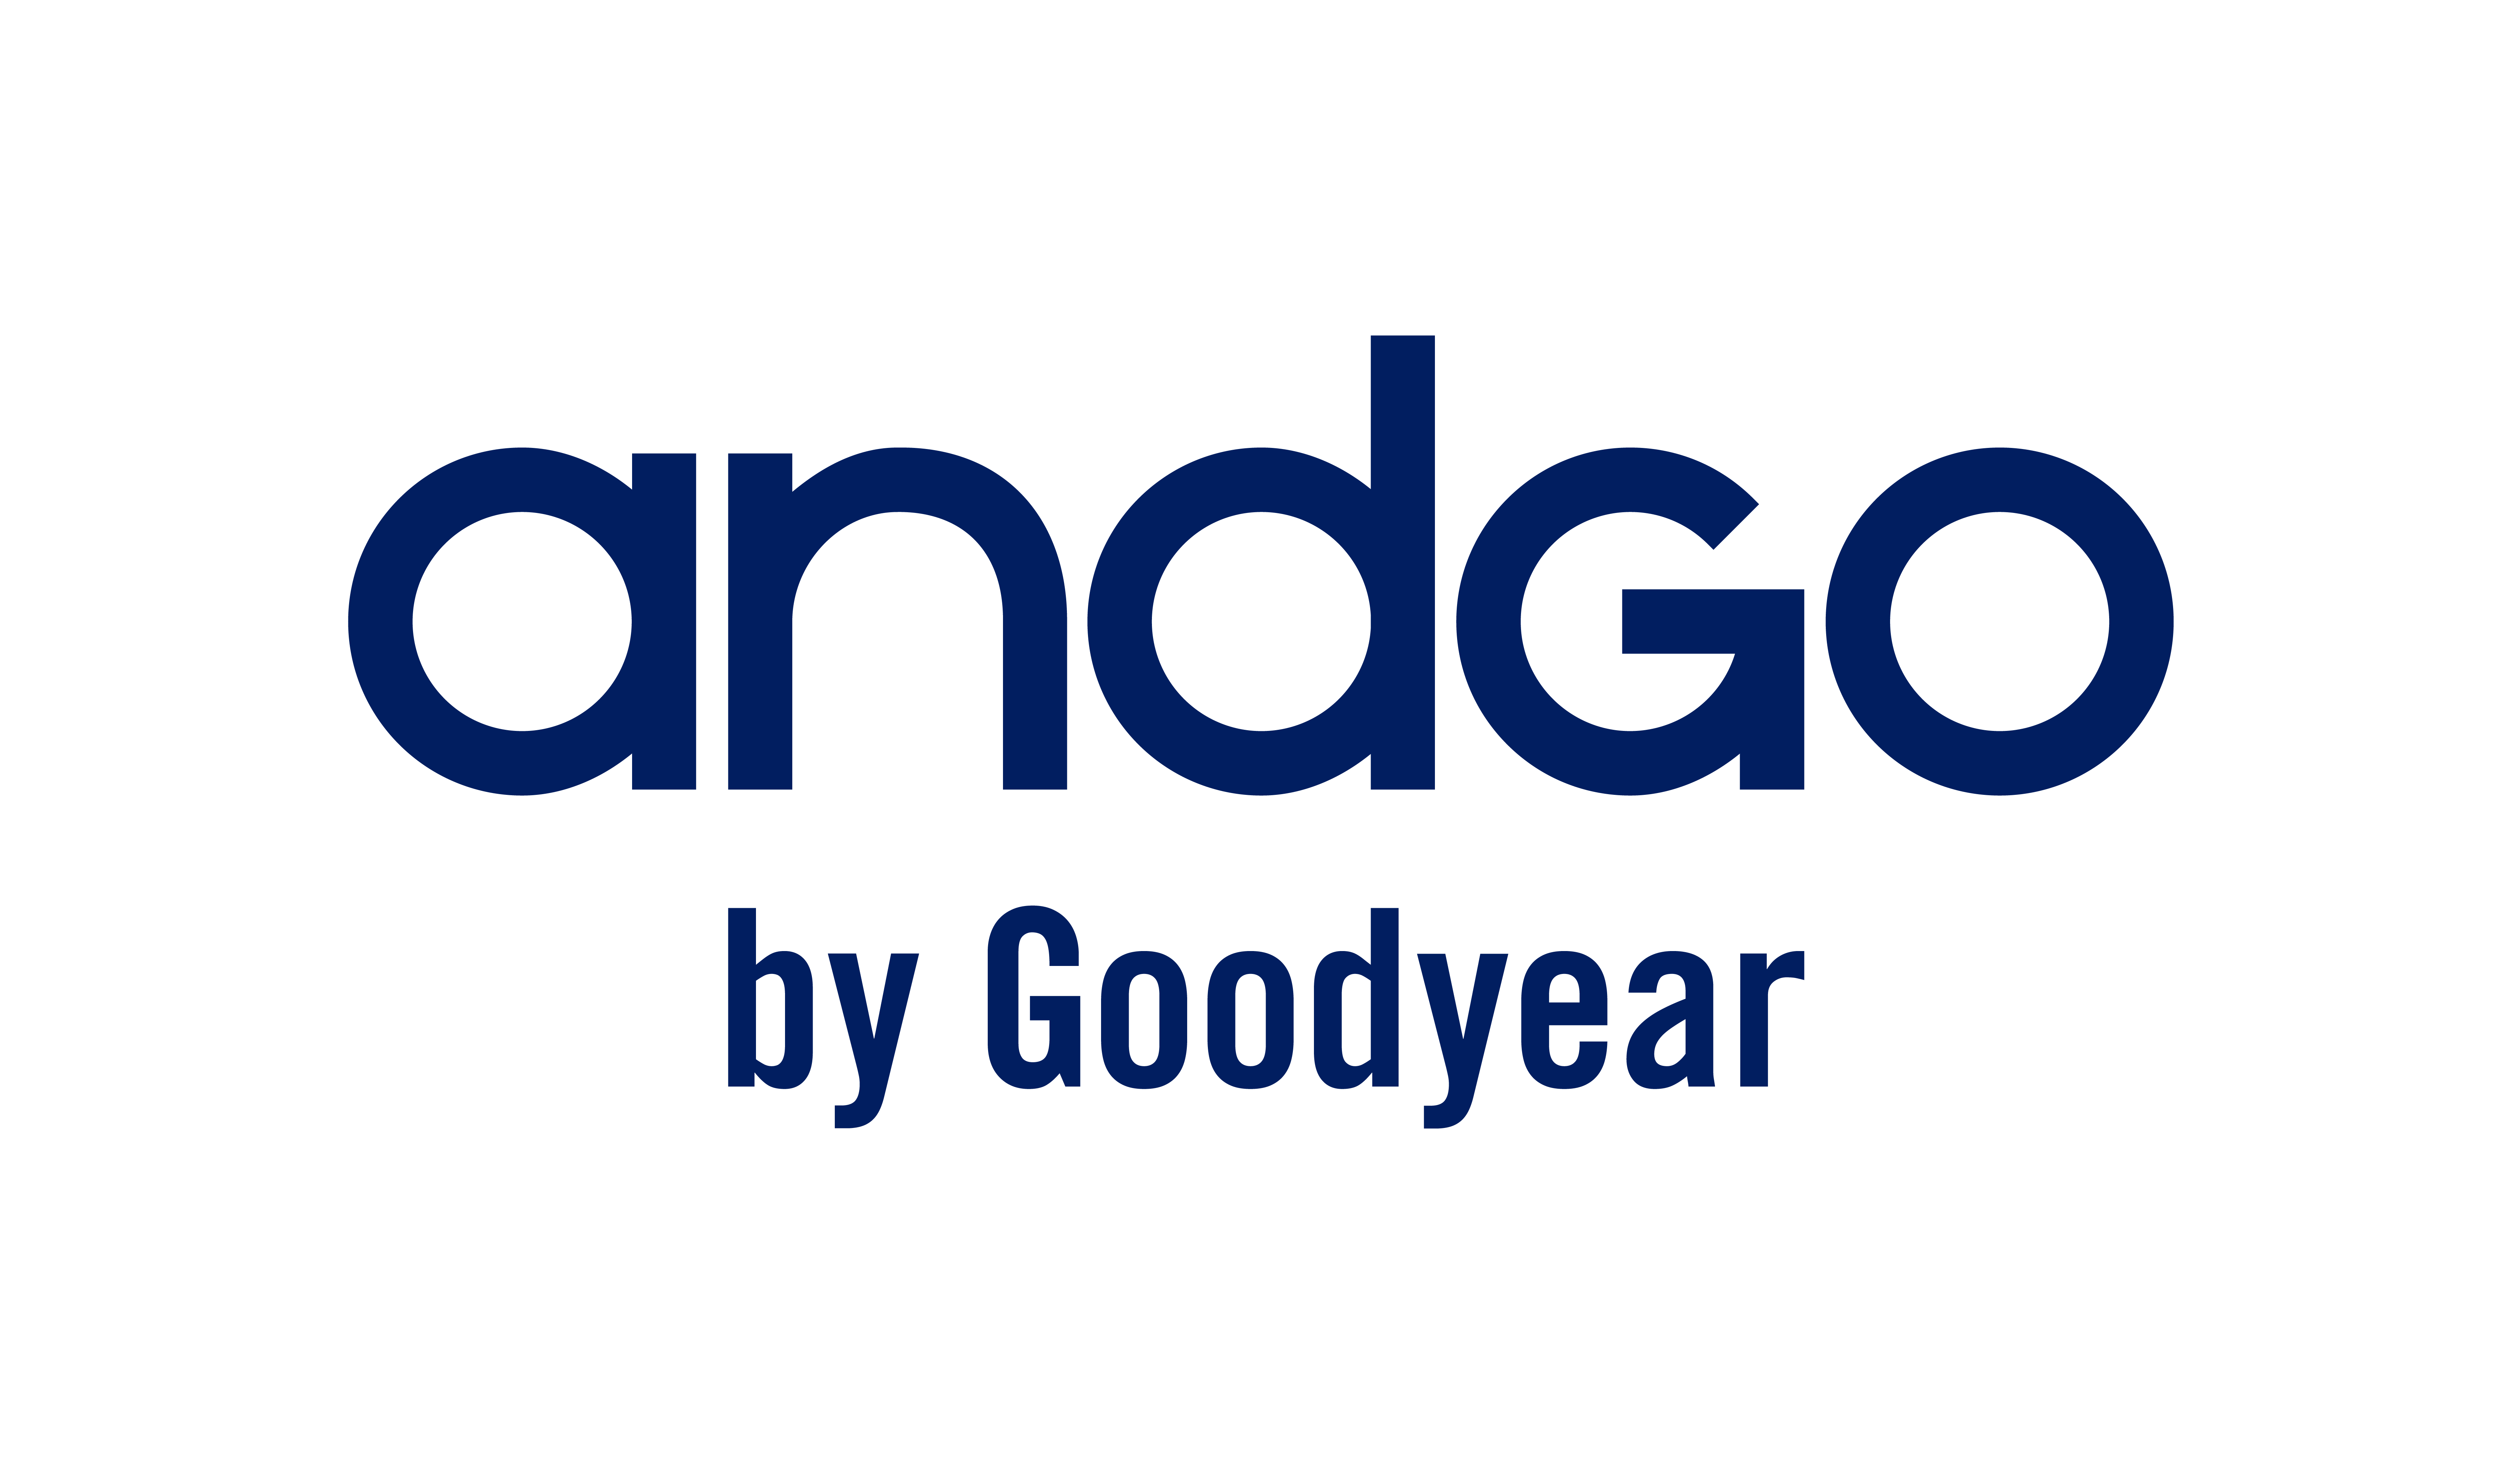 AndGo by Goodyear